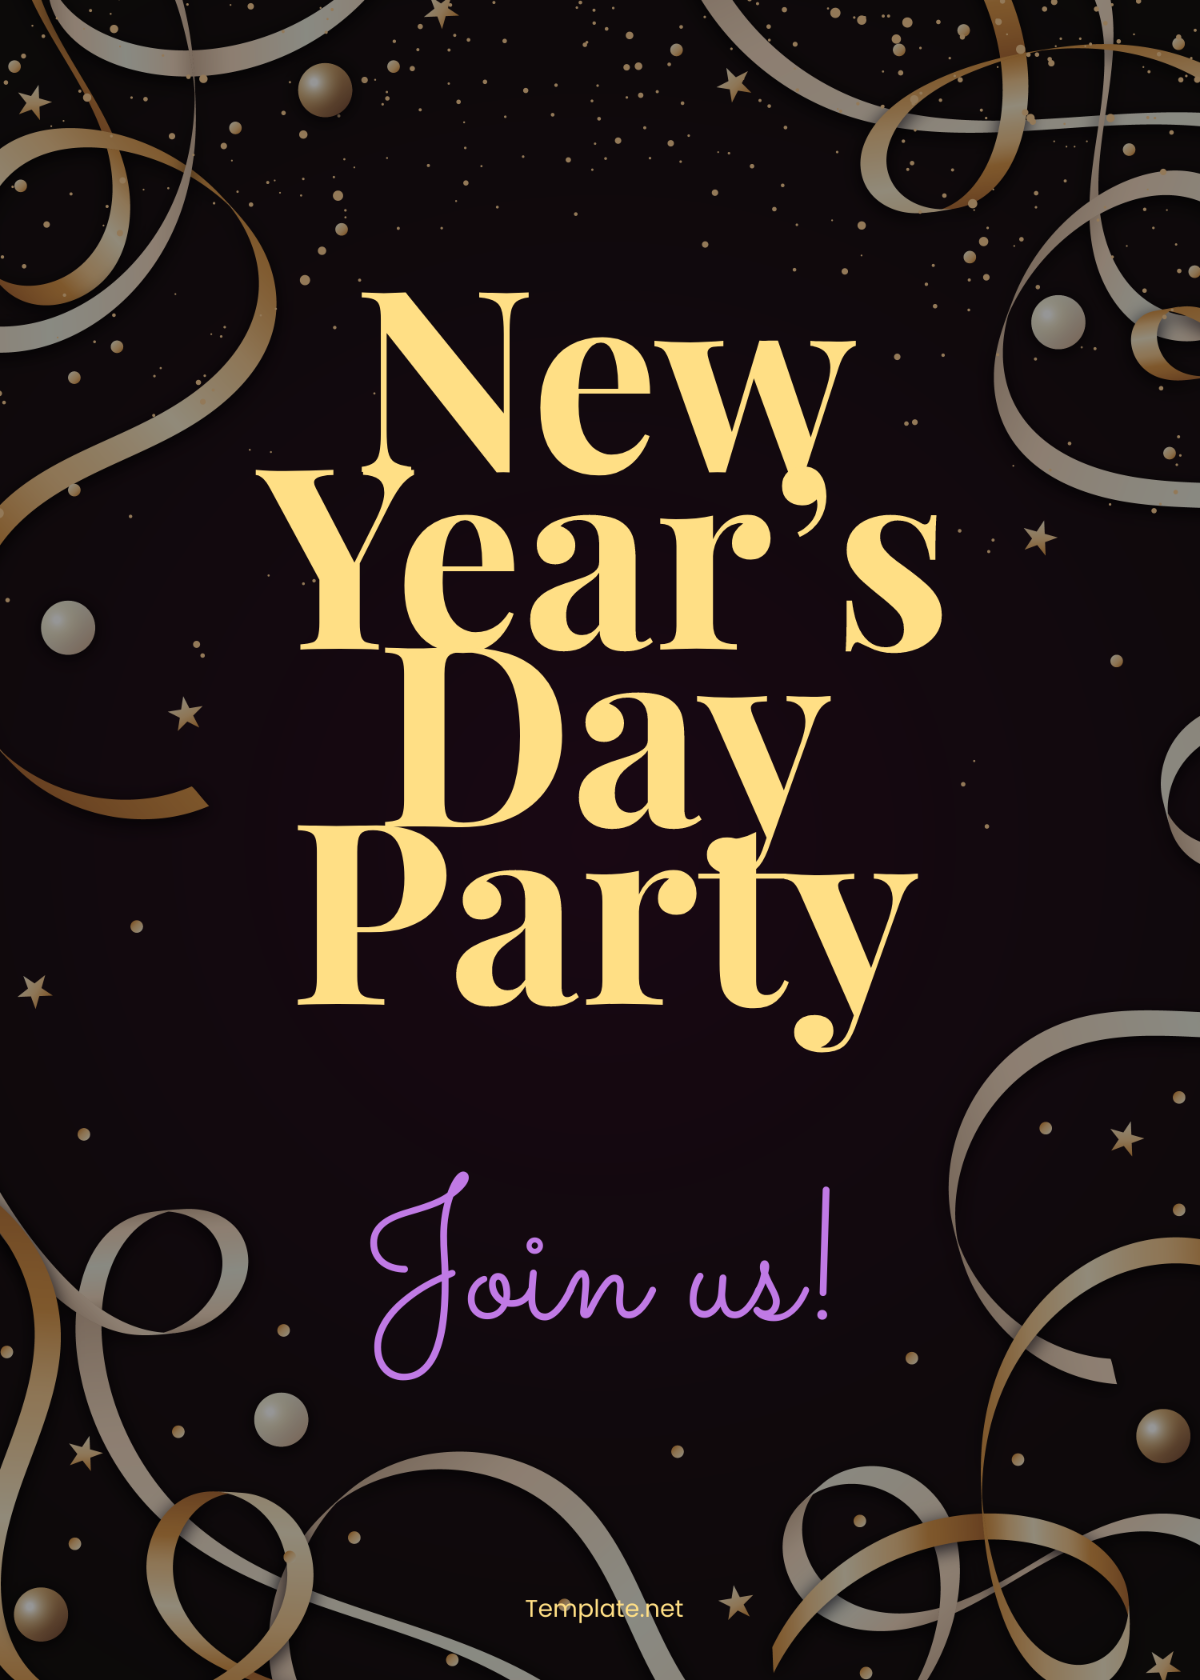 New Year's Day Party Invitation Template